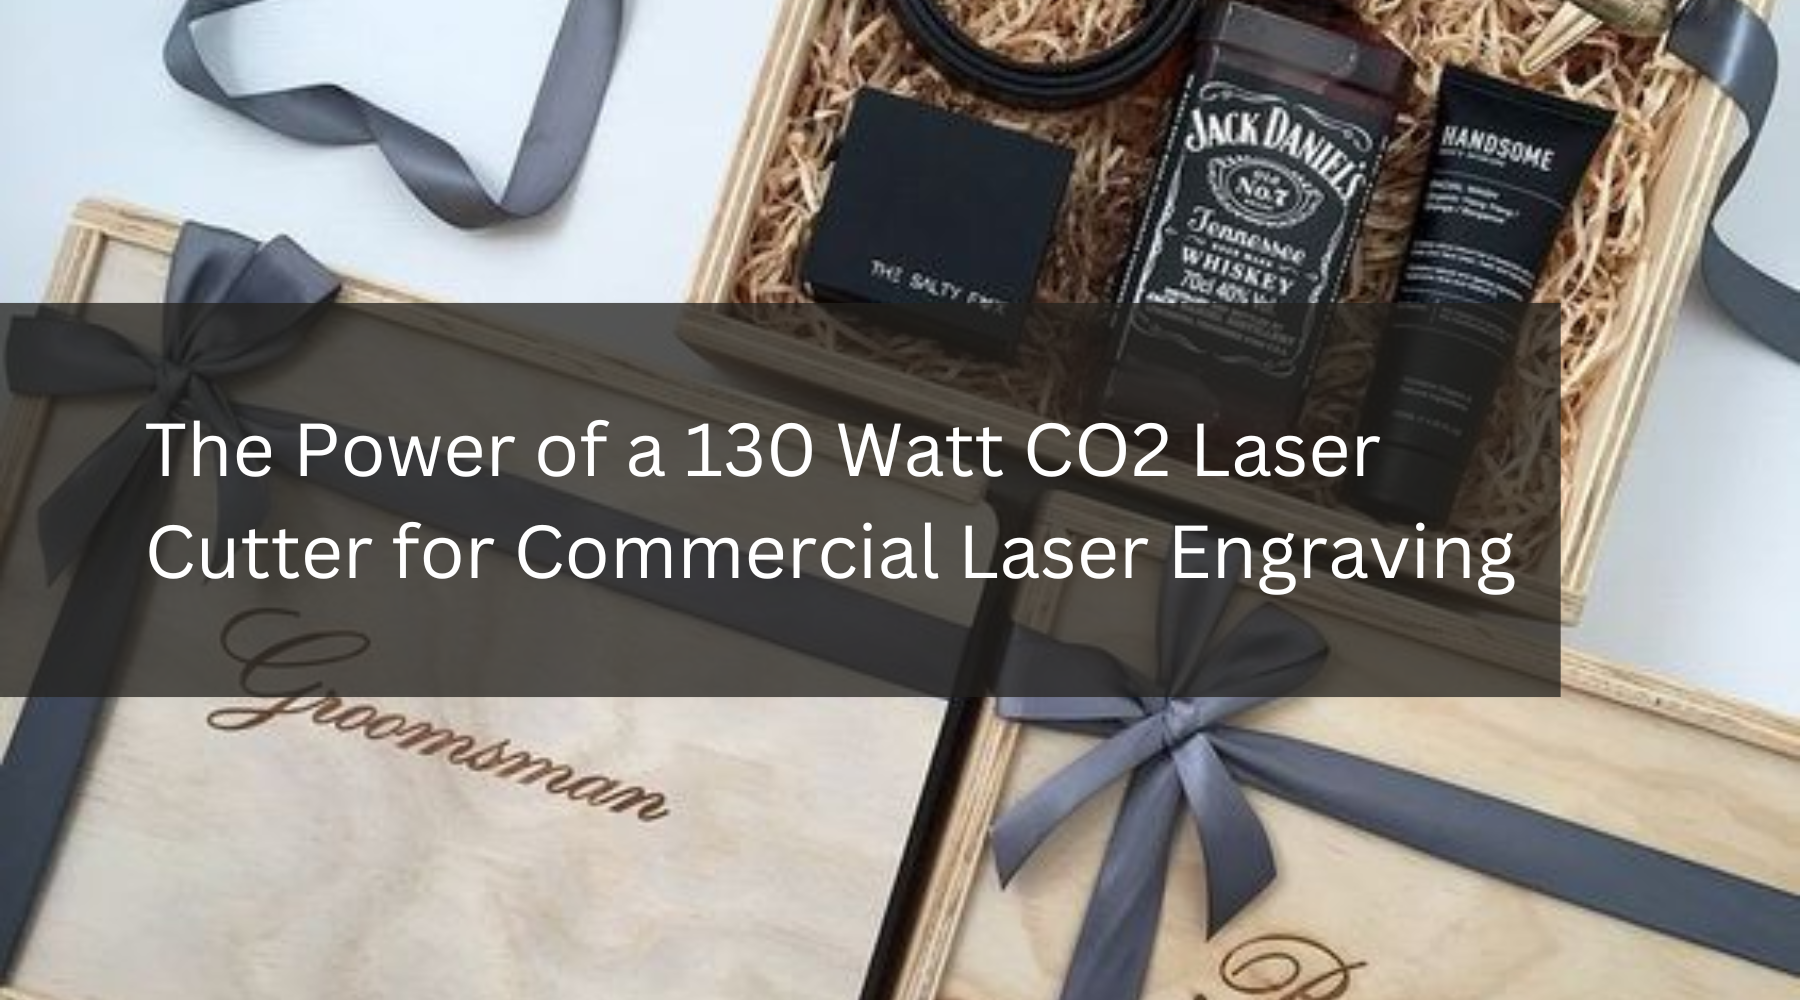 The Power of a 130 Watt CO2 Laser Cutter for Commercial Laser Engraving